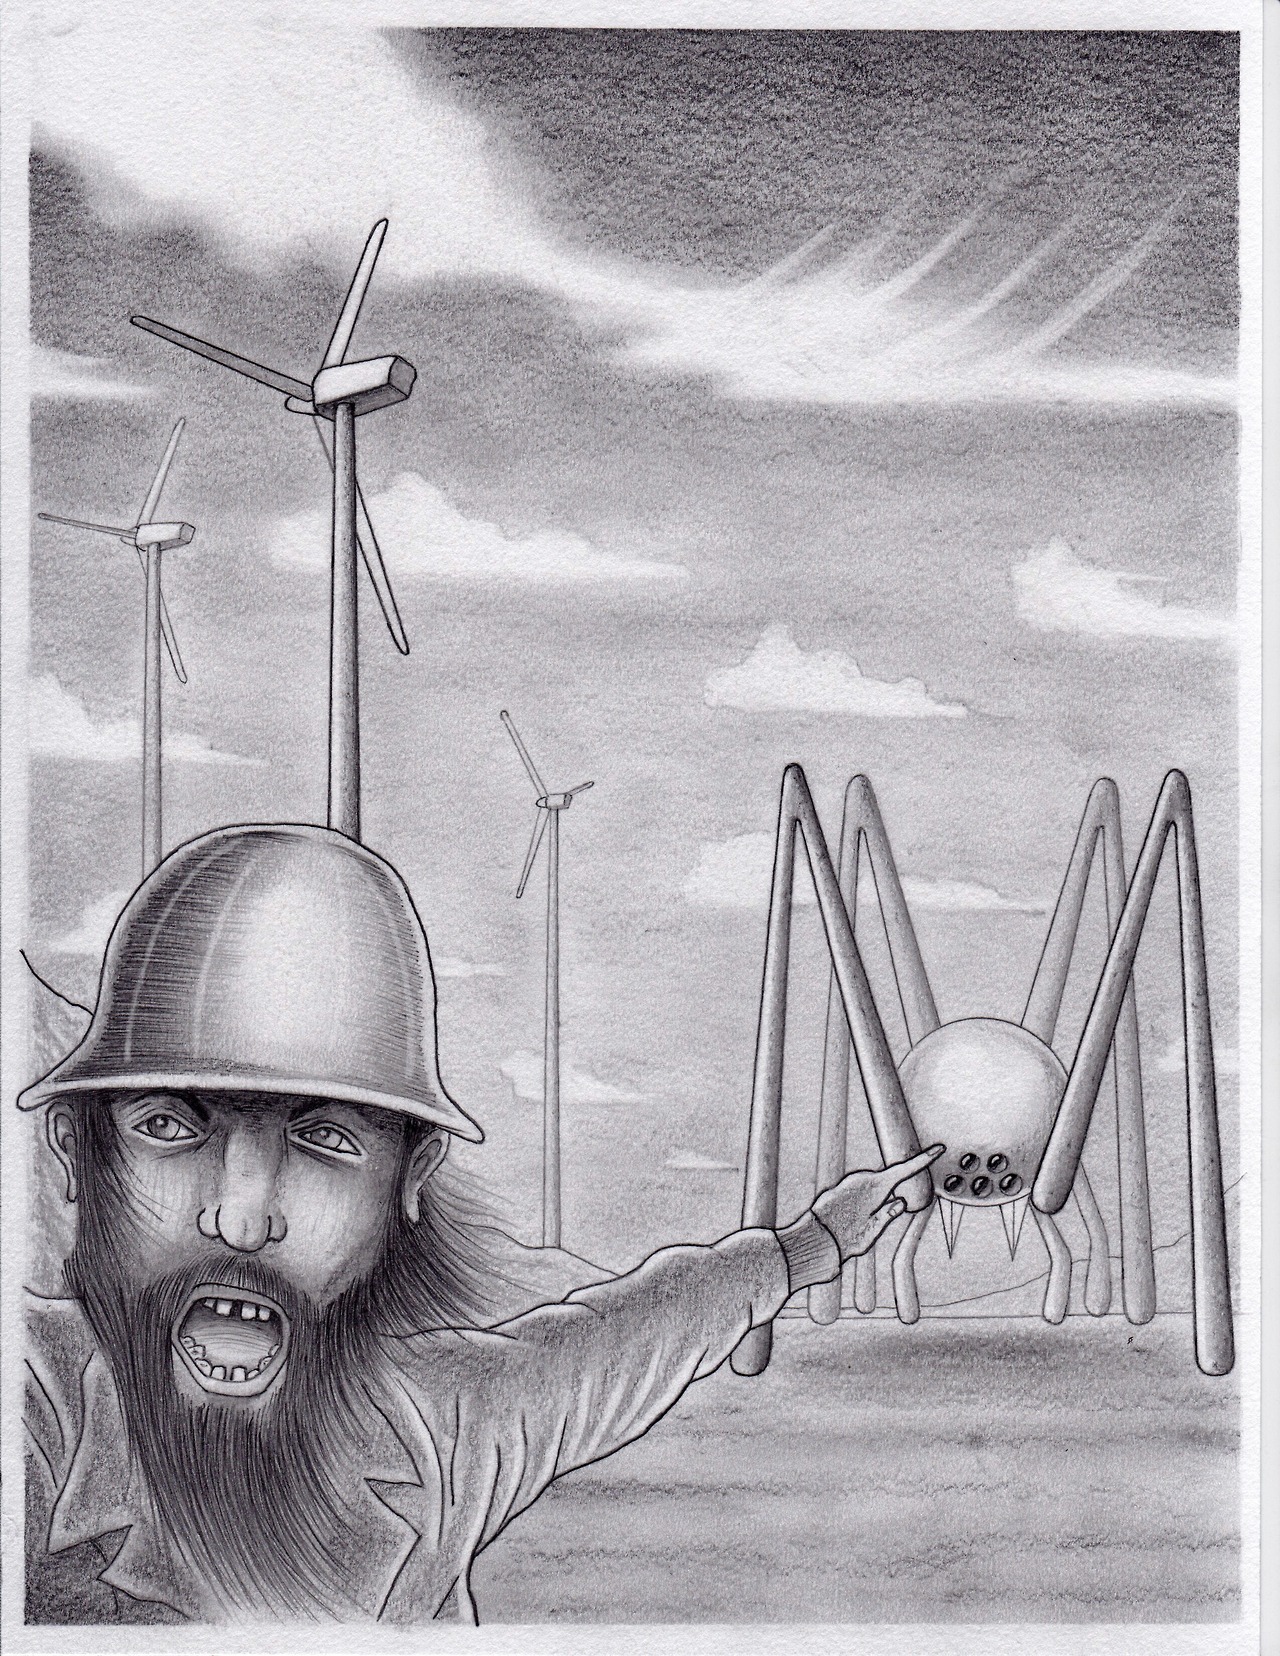 Ted Casterline A GSA Wind Turbine Tech Sounds the Alarm as an EPA U38 Appears in the Distance Pencil on paper 11" x 8 ½" My Instagram My Online Shop Tumblr — Immediately post your art to a topic and get feedback. Join our new community, EatSleepDraw...